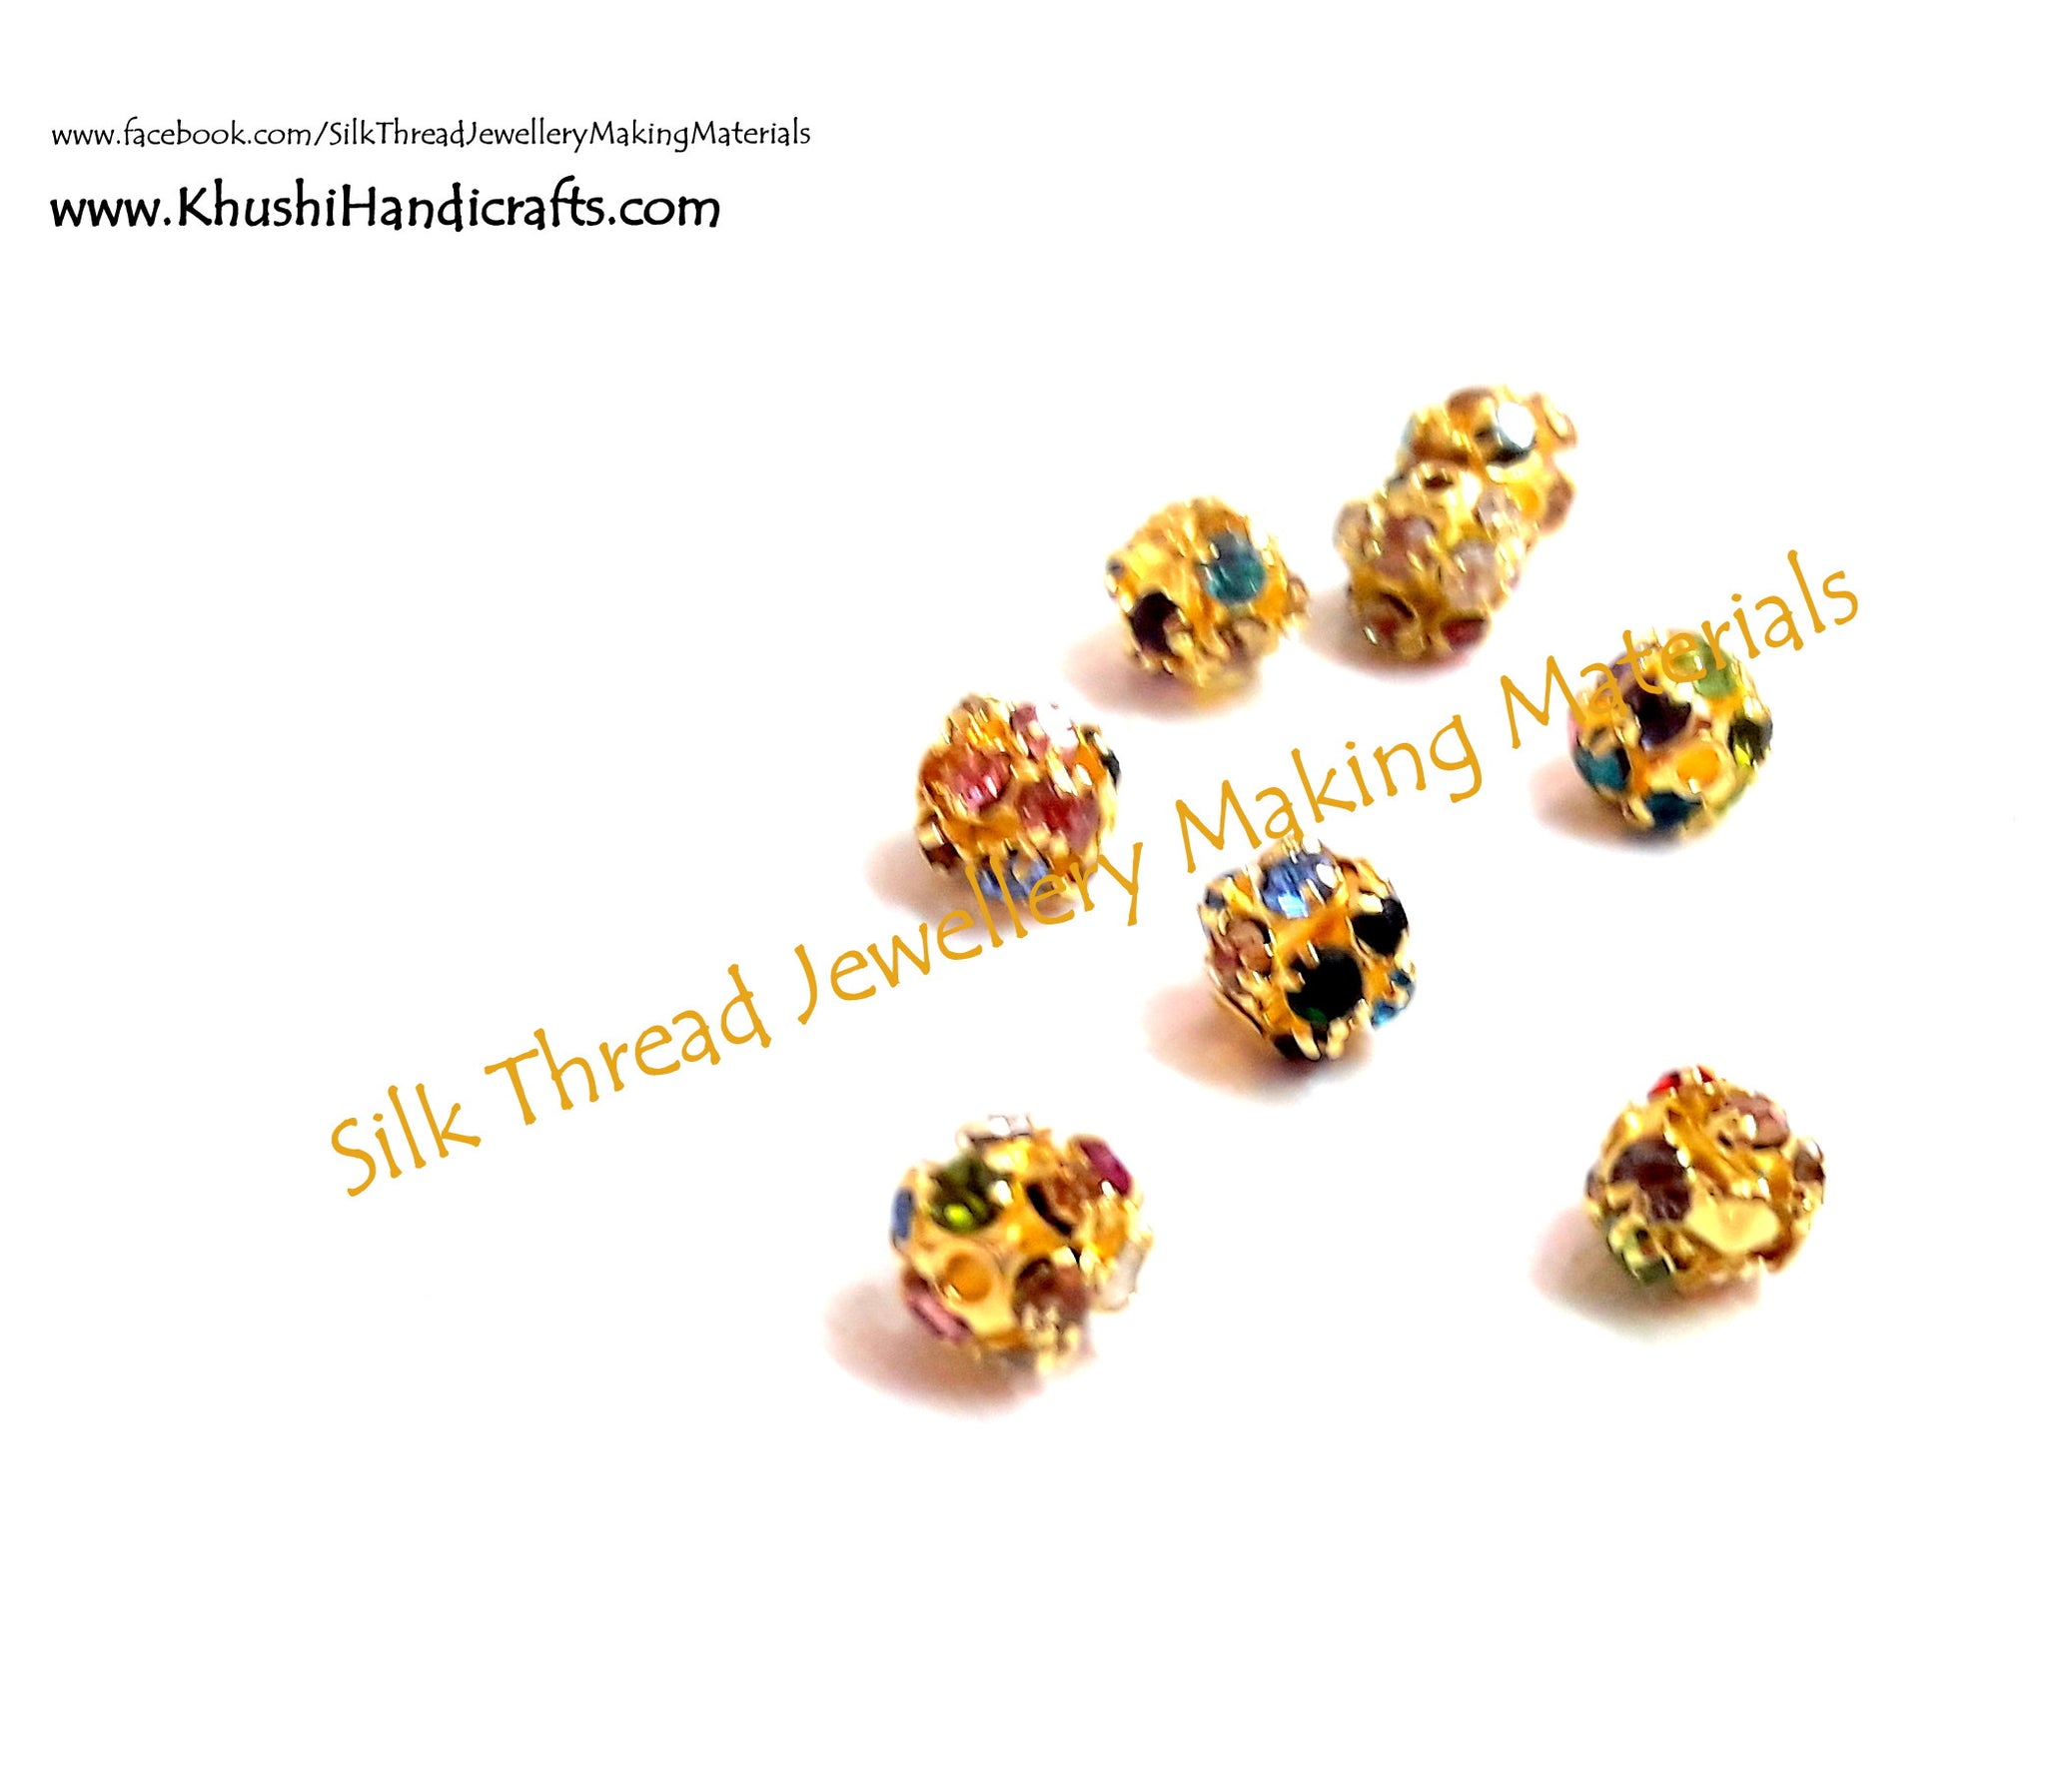 Multicolored Rhinestone / Stone Balls / stoneball . Sold as a pack of 10 pieces! - Khushi Handmade Jewellery